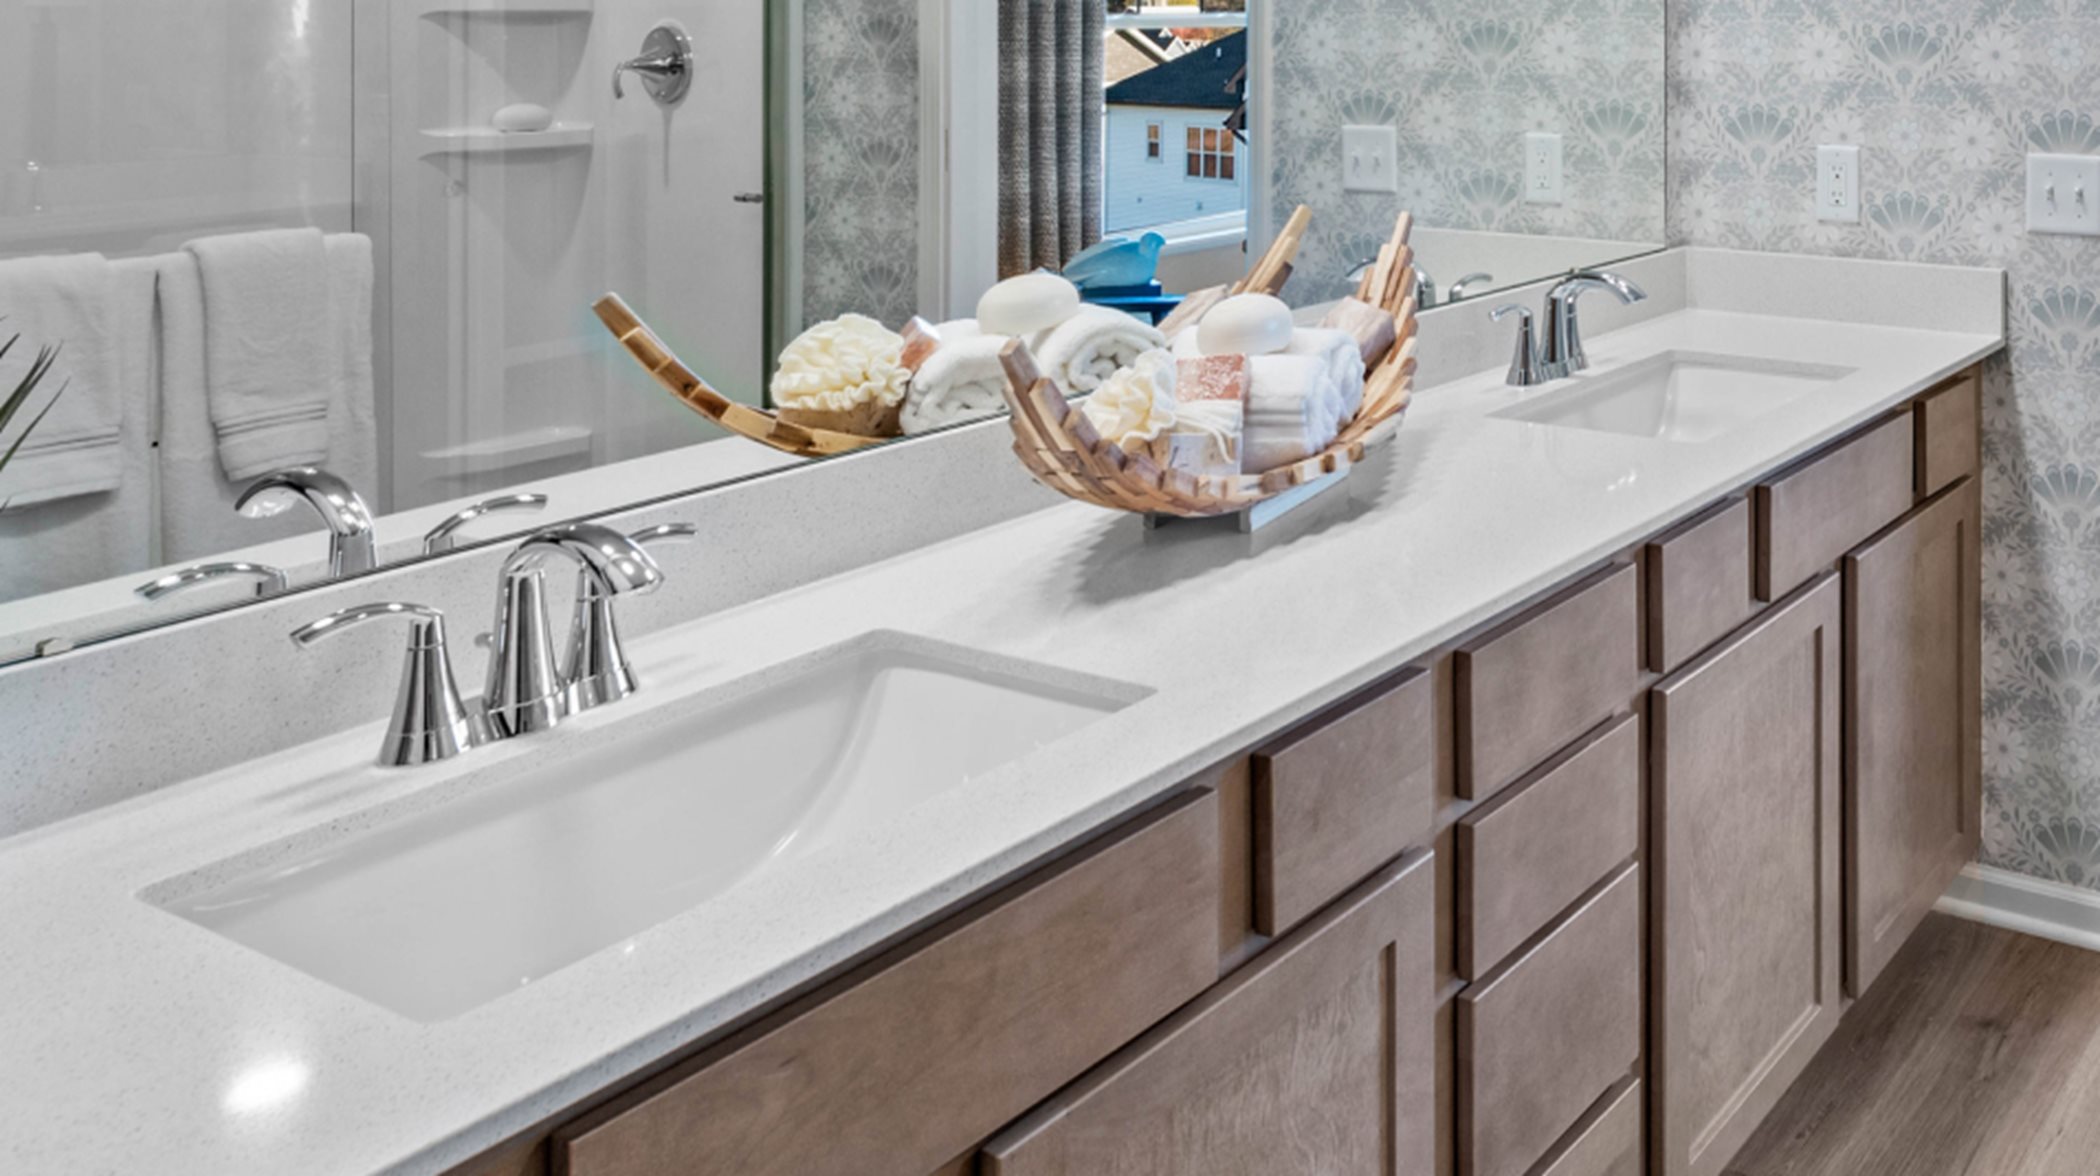 Dual rectangular undermount sinks with designer-selected countertops and Moen faucets